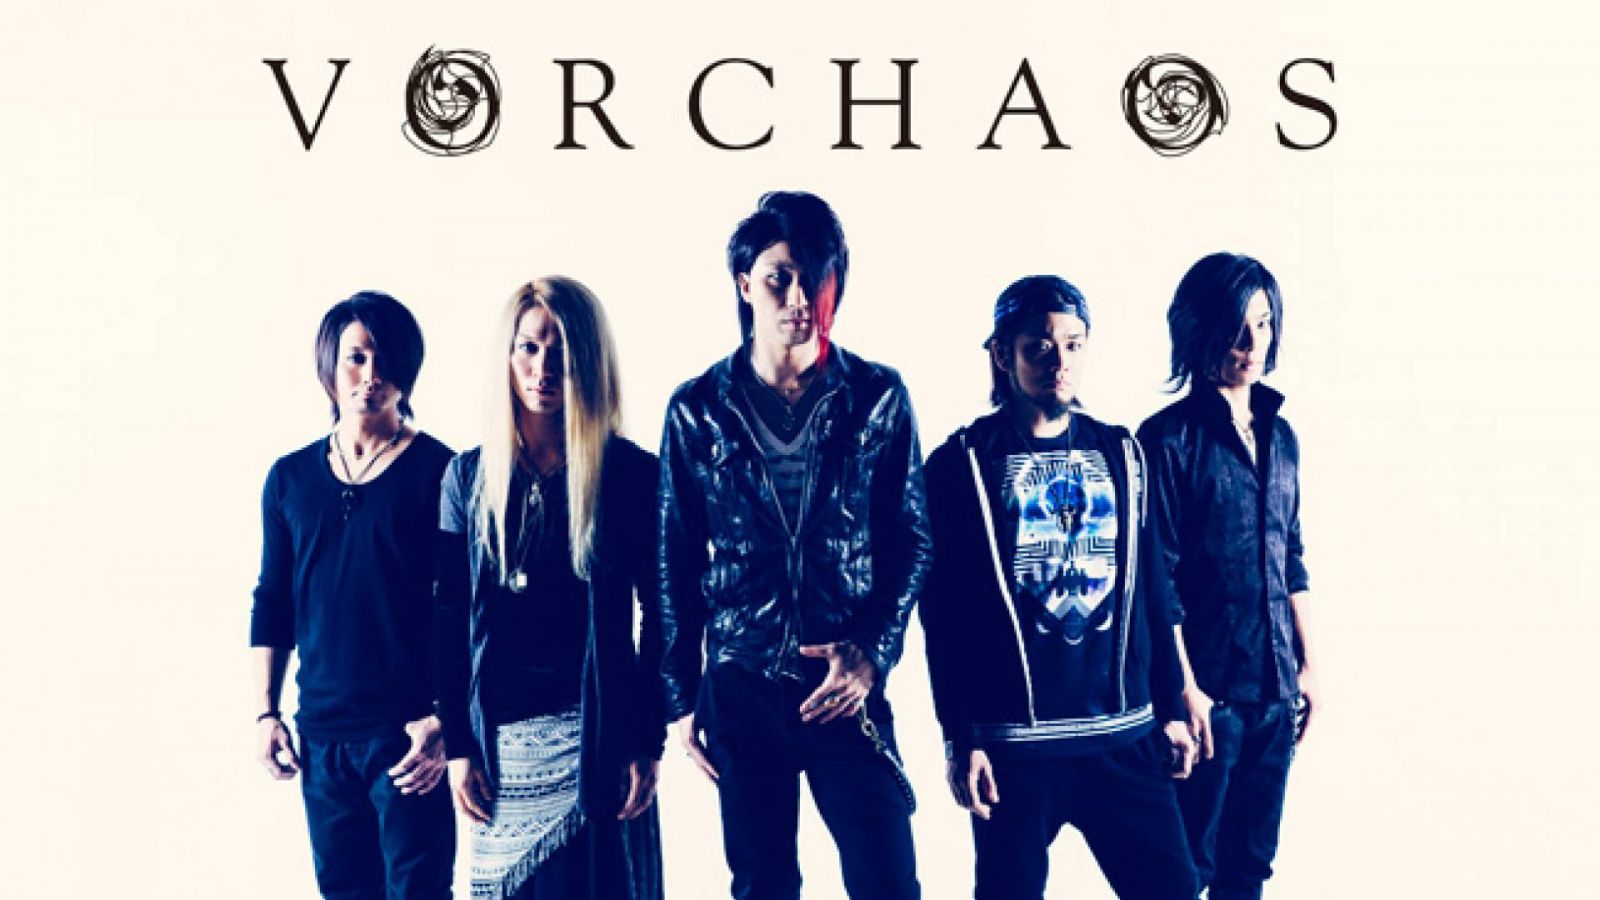 Vorchaos © 2018 Vorchaos. Provided by A-Line Music.